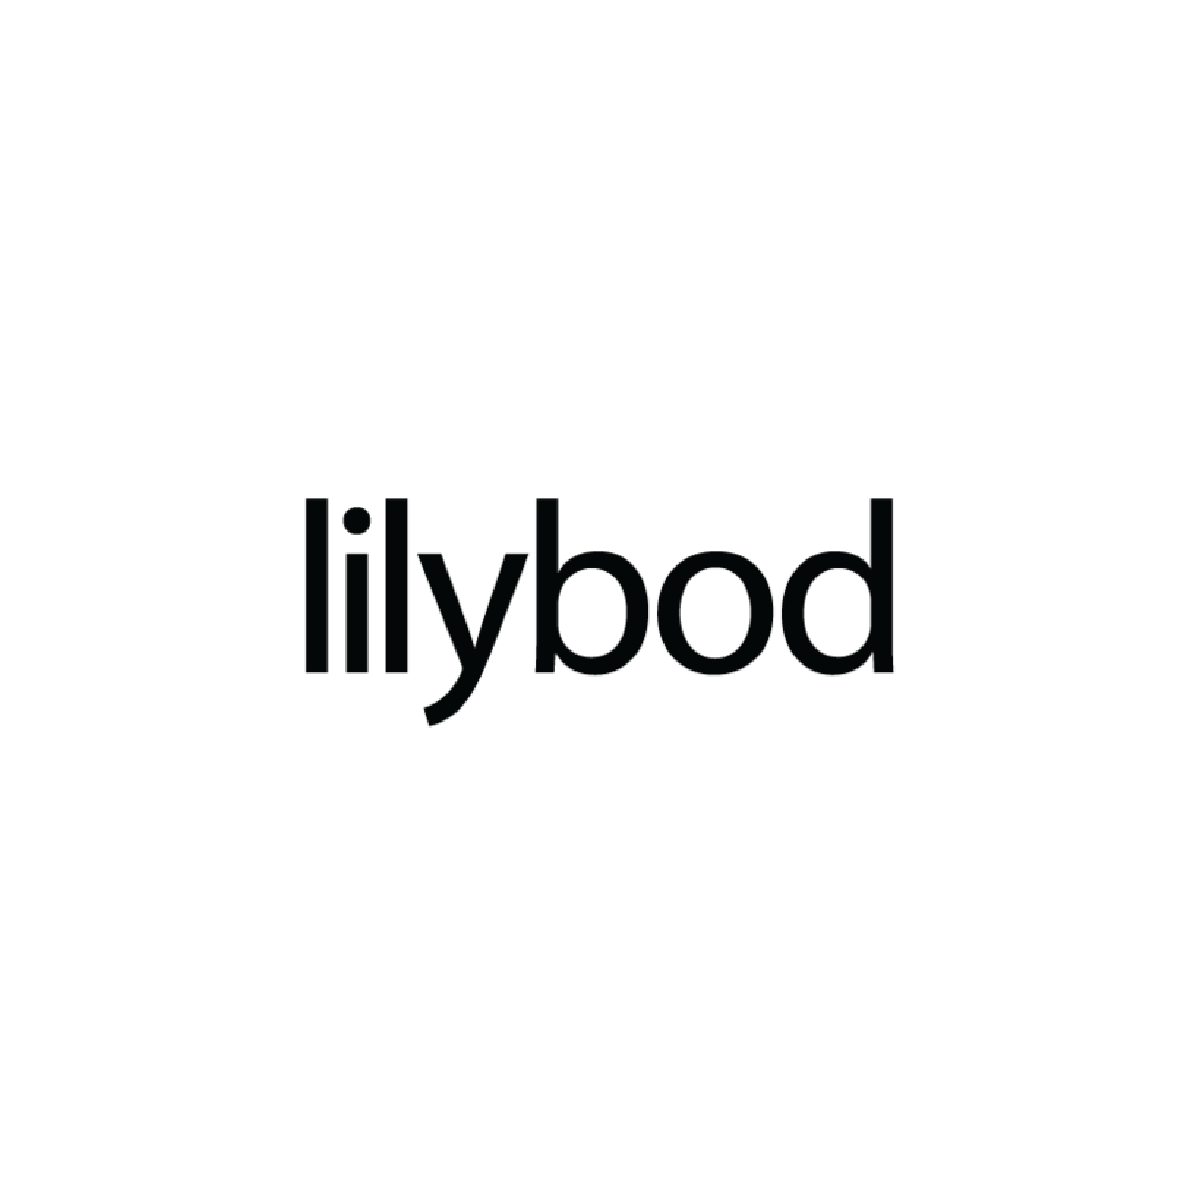 lilybod.png